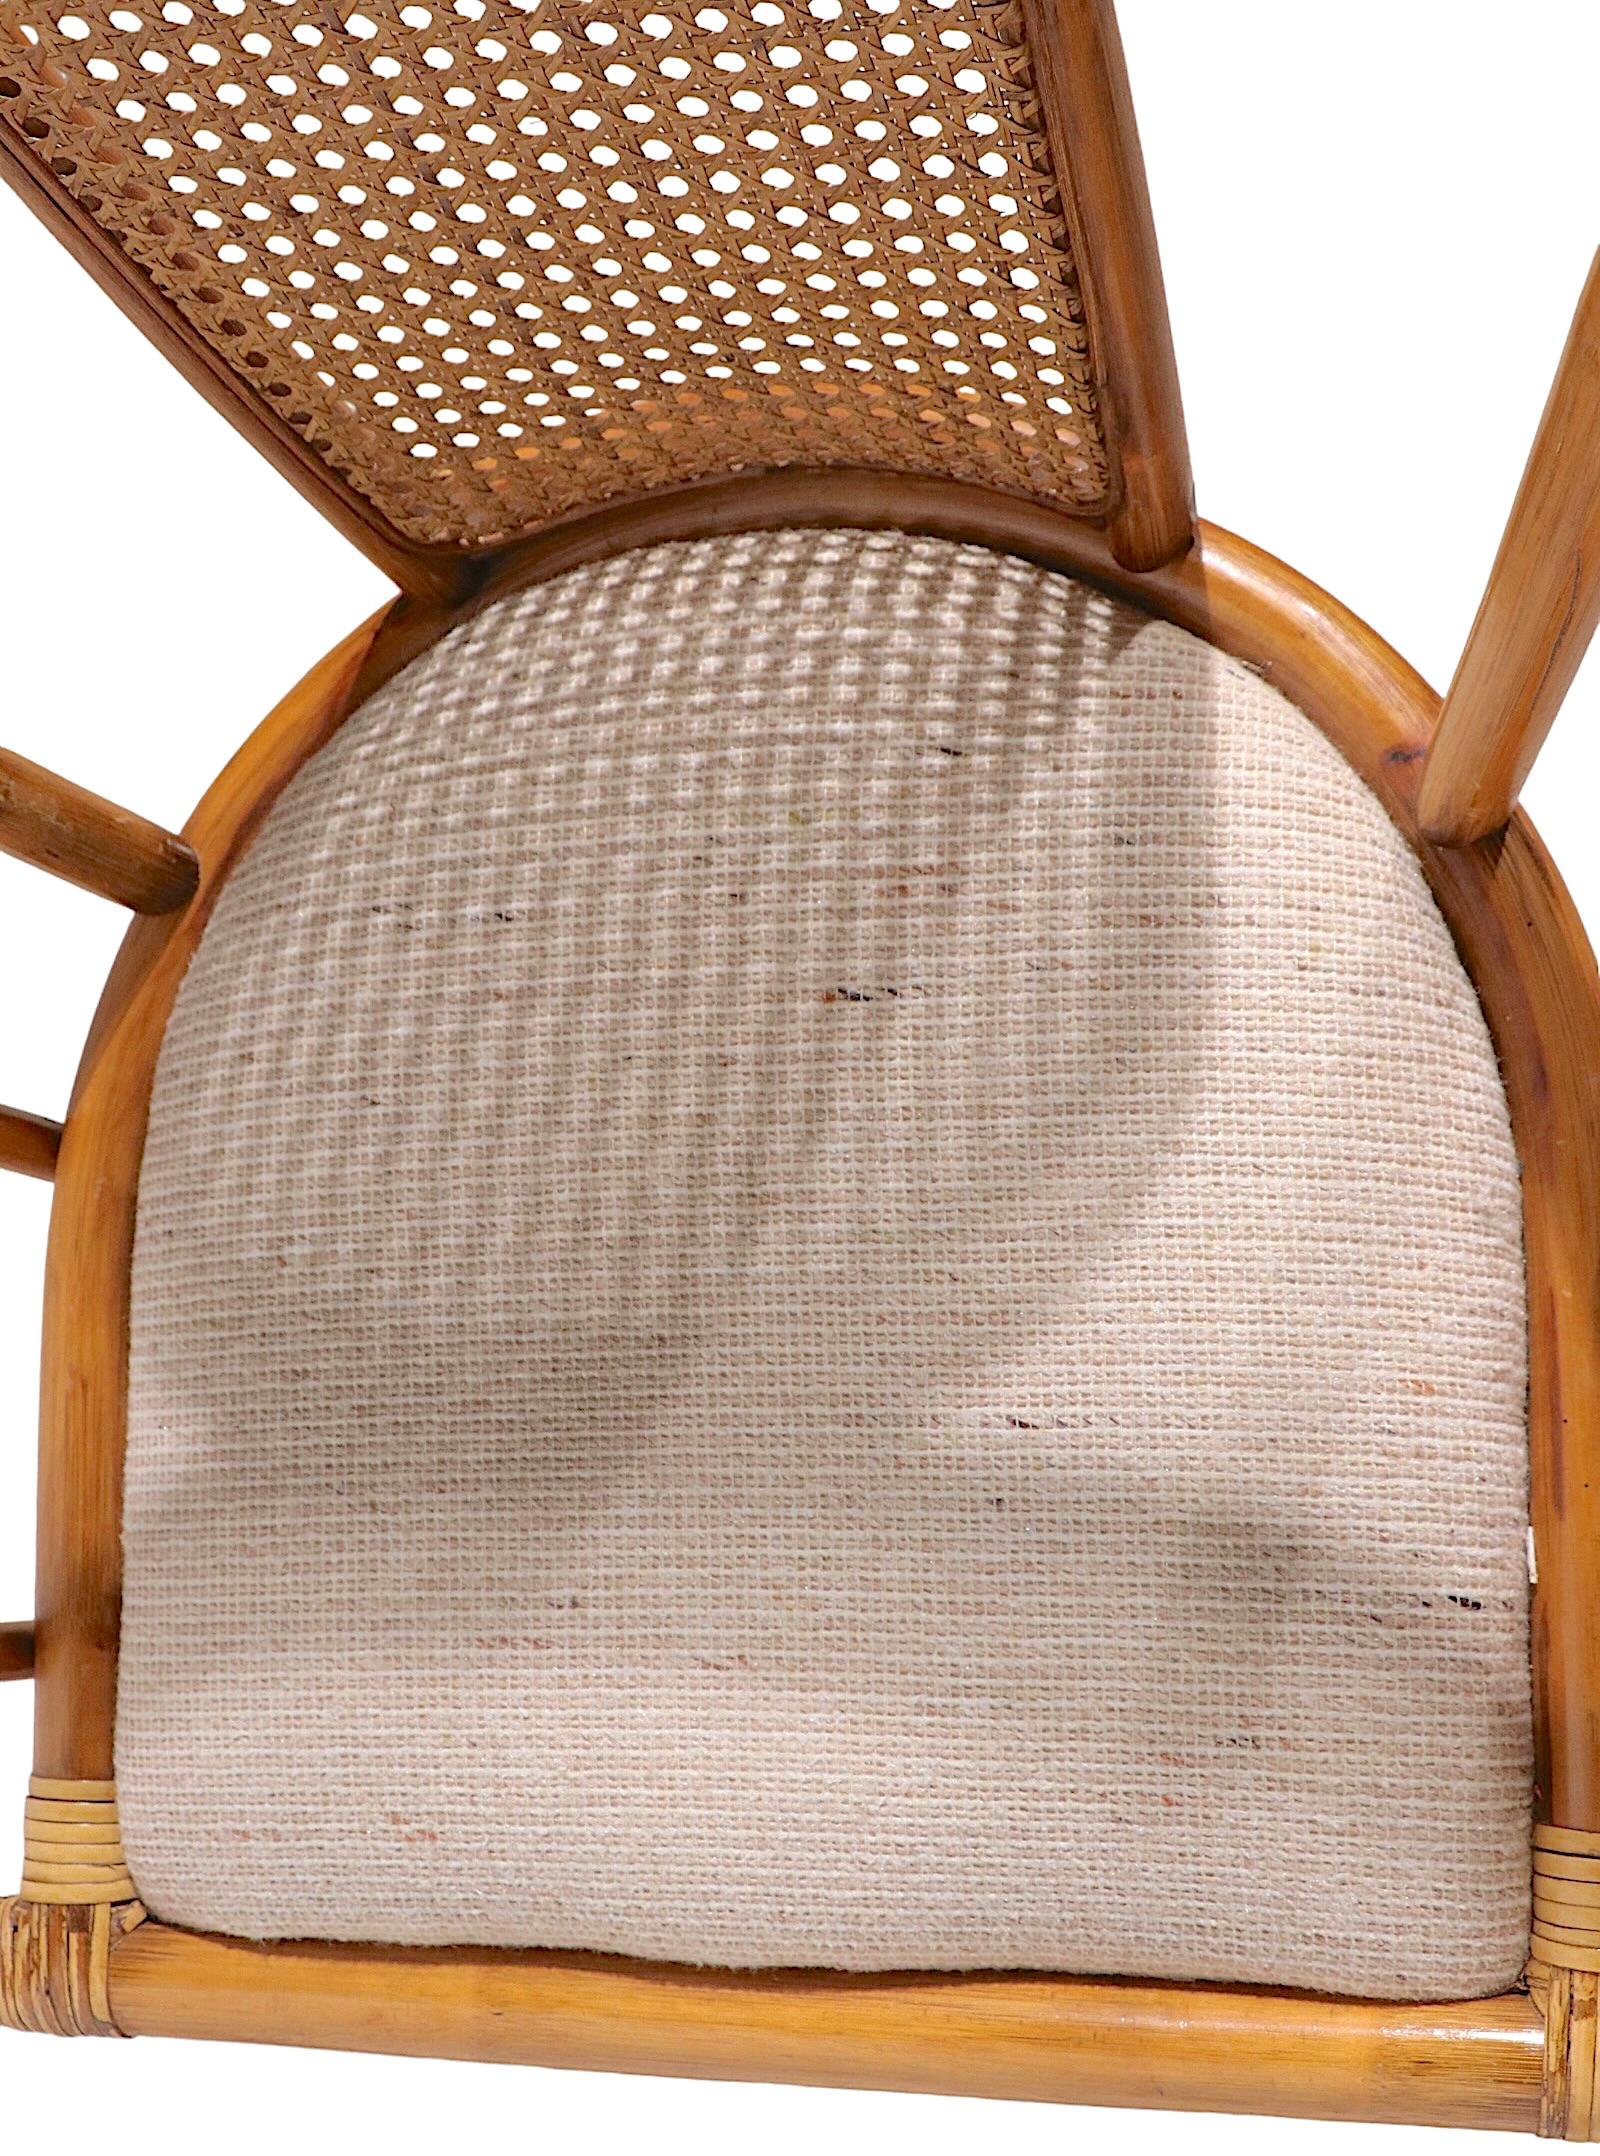 High Style Mid Century swivel bamboo chair designed by Henry Olko. This example is in very fine, original, clean and ready to use condition. Olko pieces are becoming harder and harder to find, this is a classic item from his body of work.
 Total H